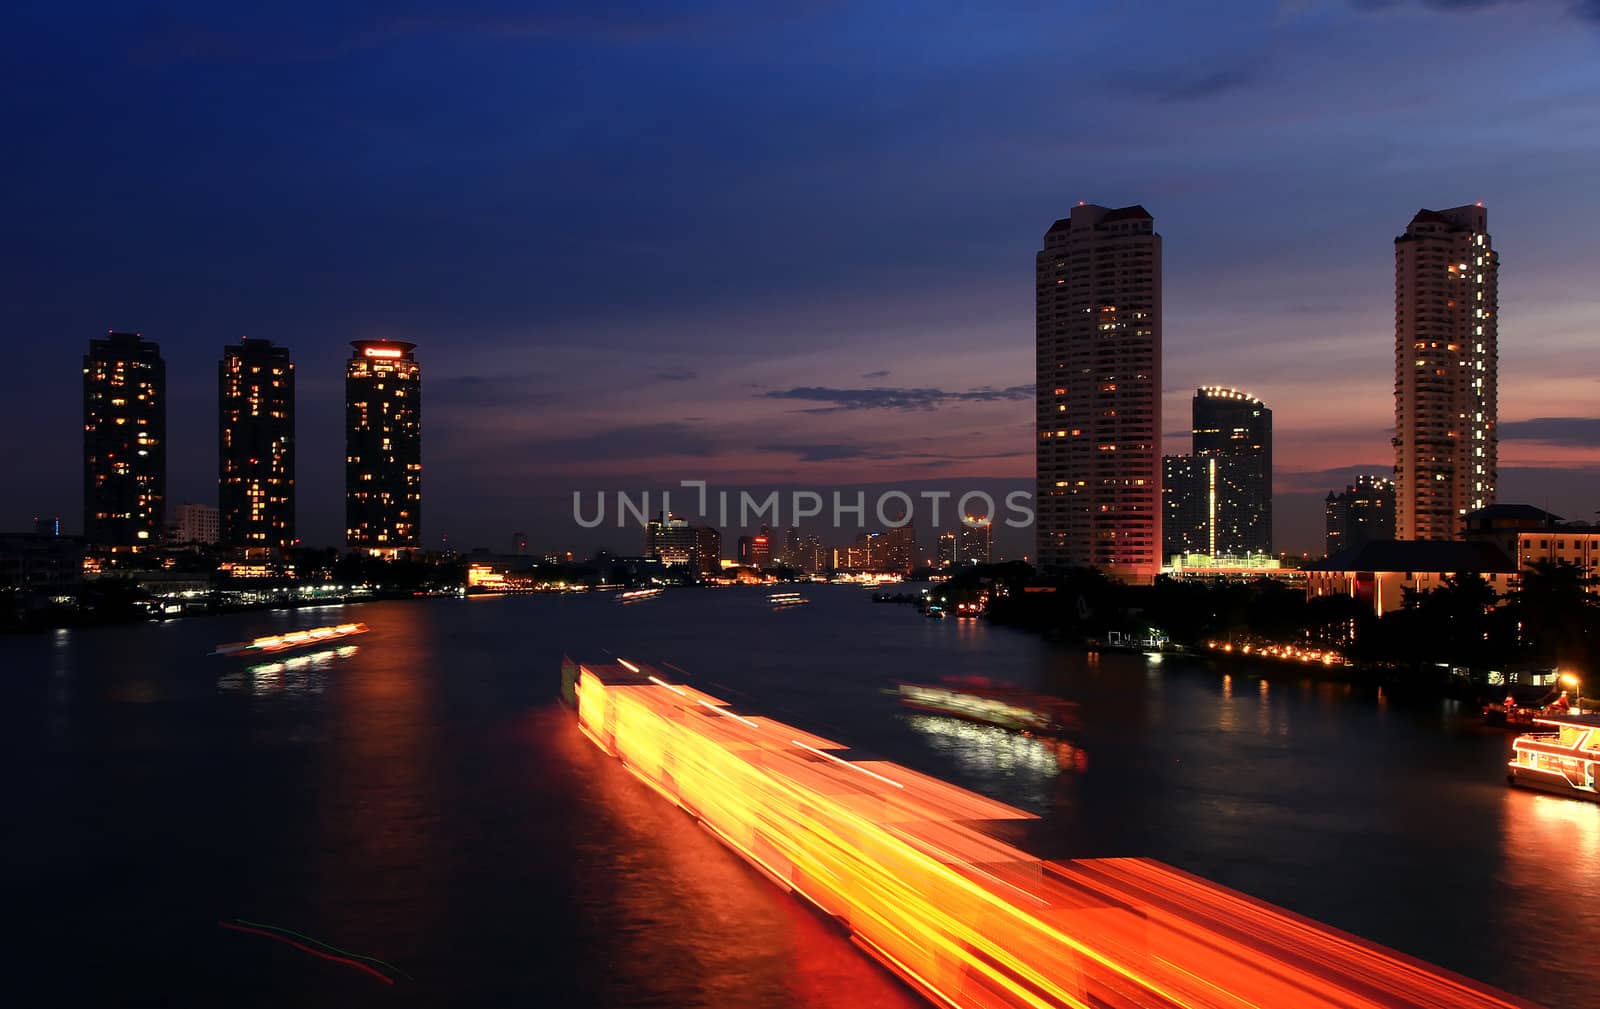 The light from the tallest building in the city and the river. Beautiful views of Bangkok Thailand.